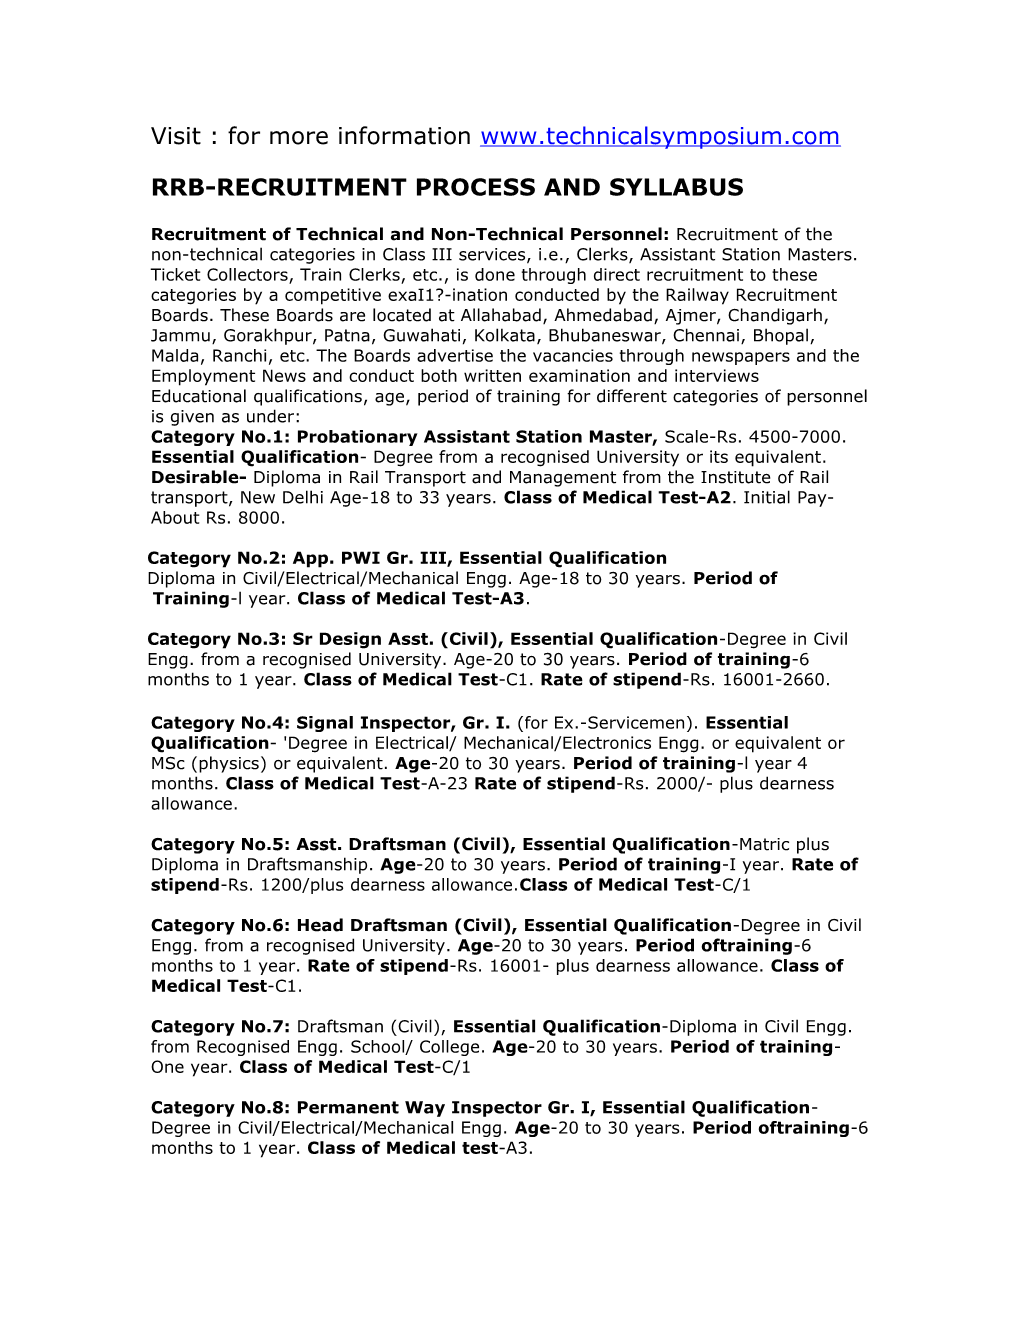 Rrb-Recruitment Process and Syllabus